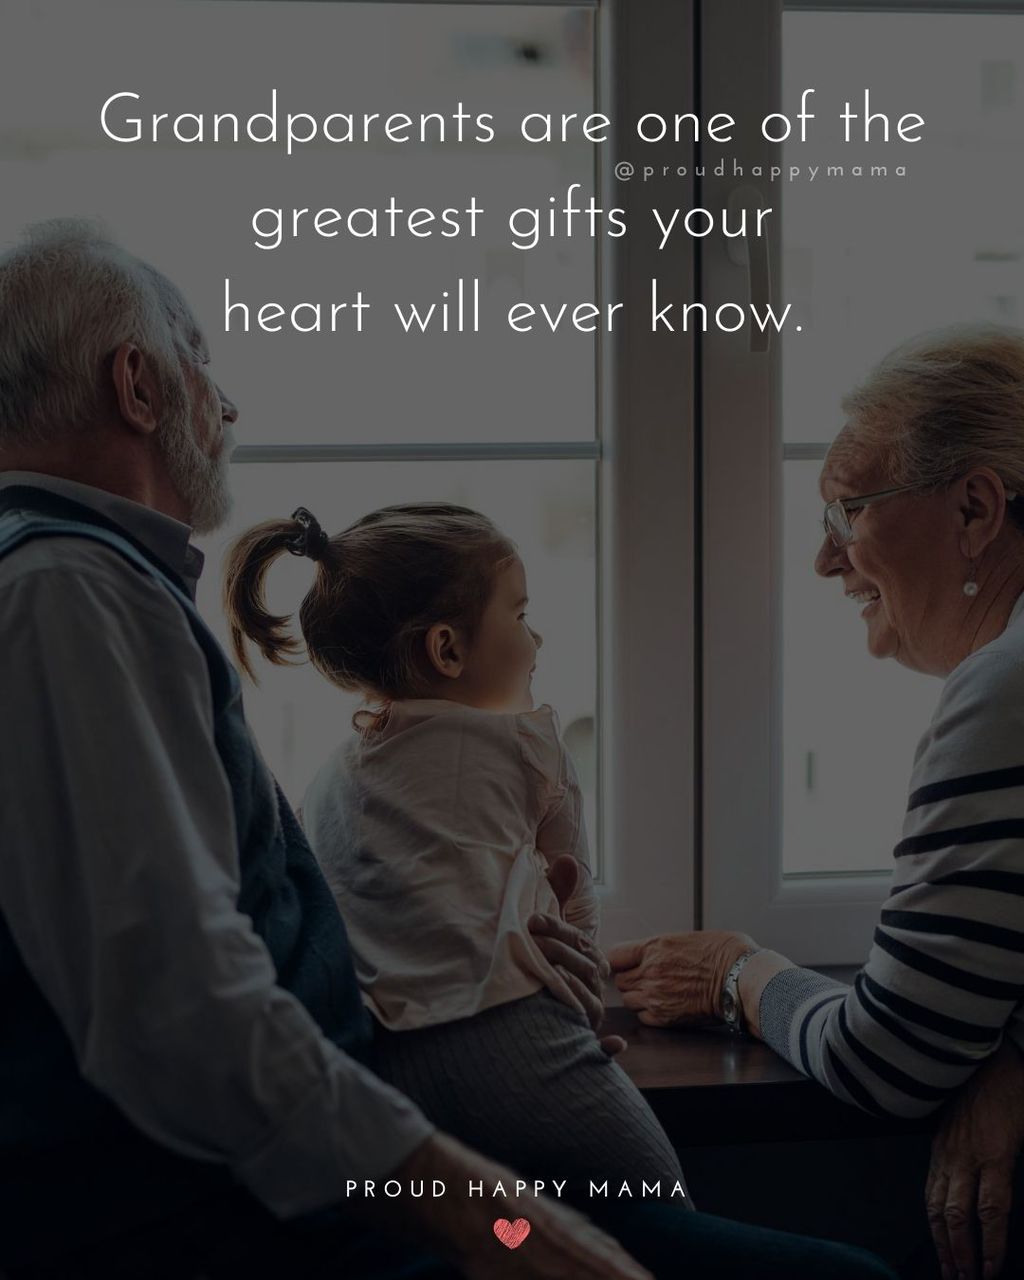 New Grandparents Quotes | Grandparents are one of the greatest gifts your heart will ever know.